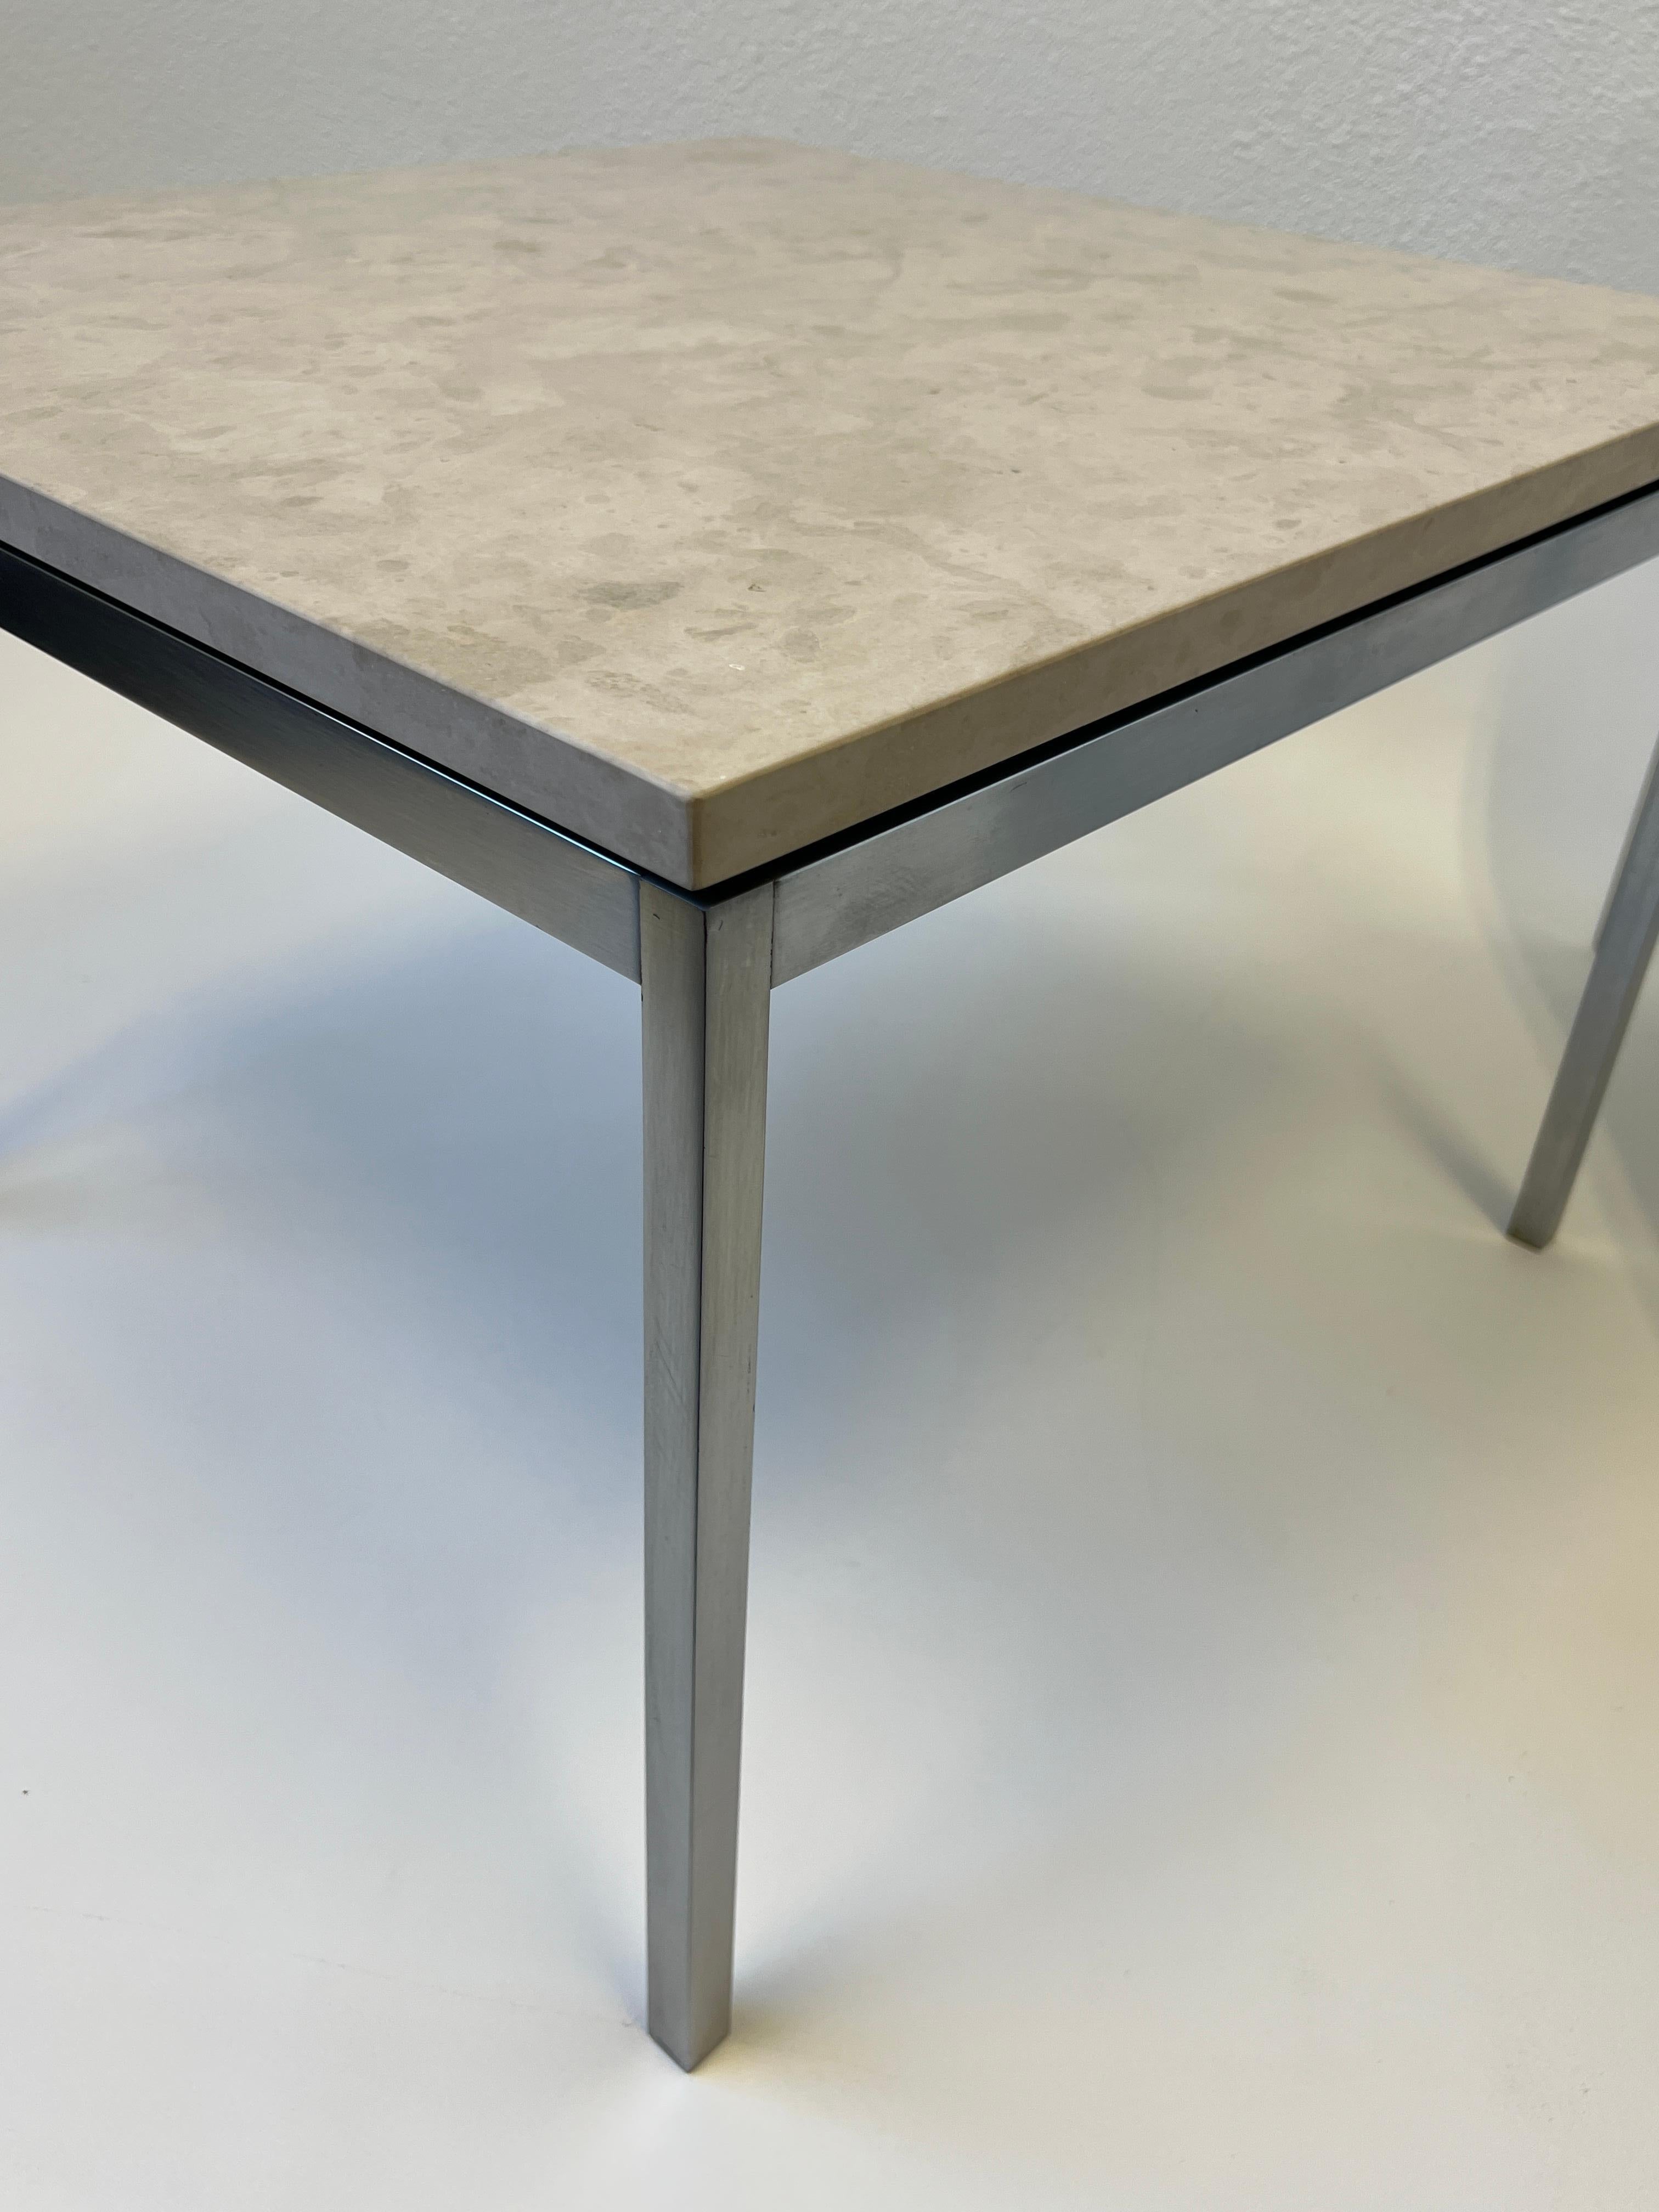 Mid-20th Century Pair of Brush stainless Steel and Granite Side Tables by Florence Knoll For Sale